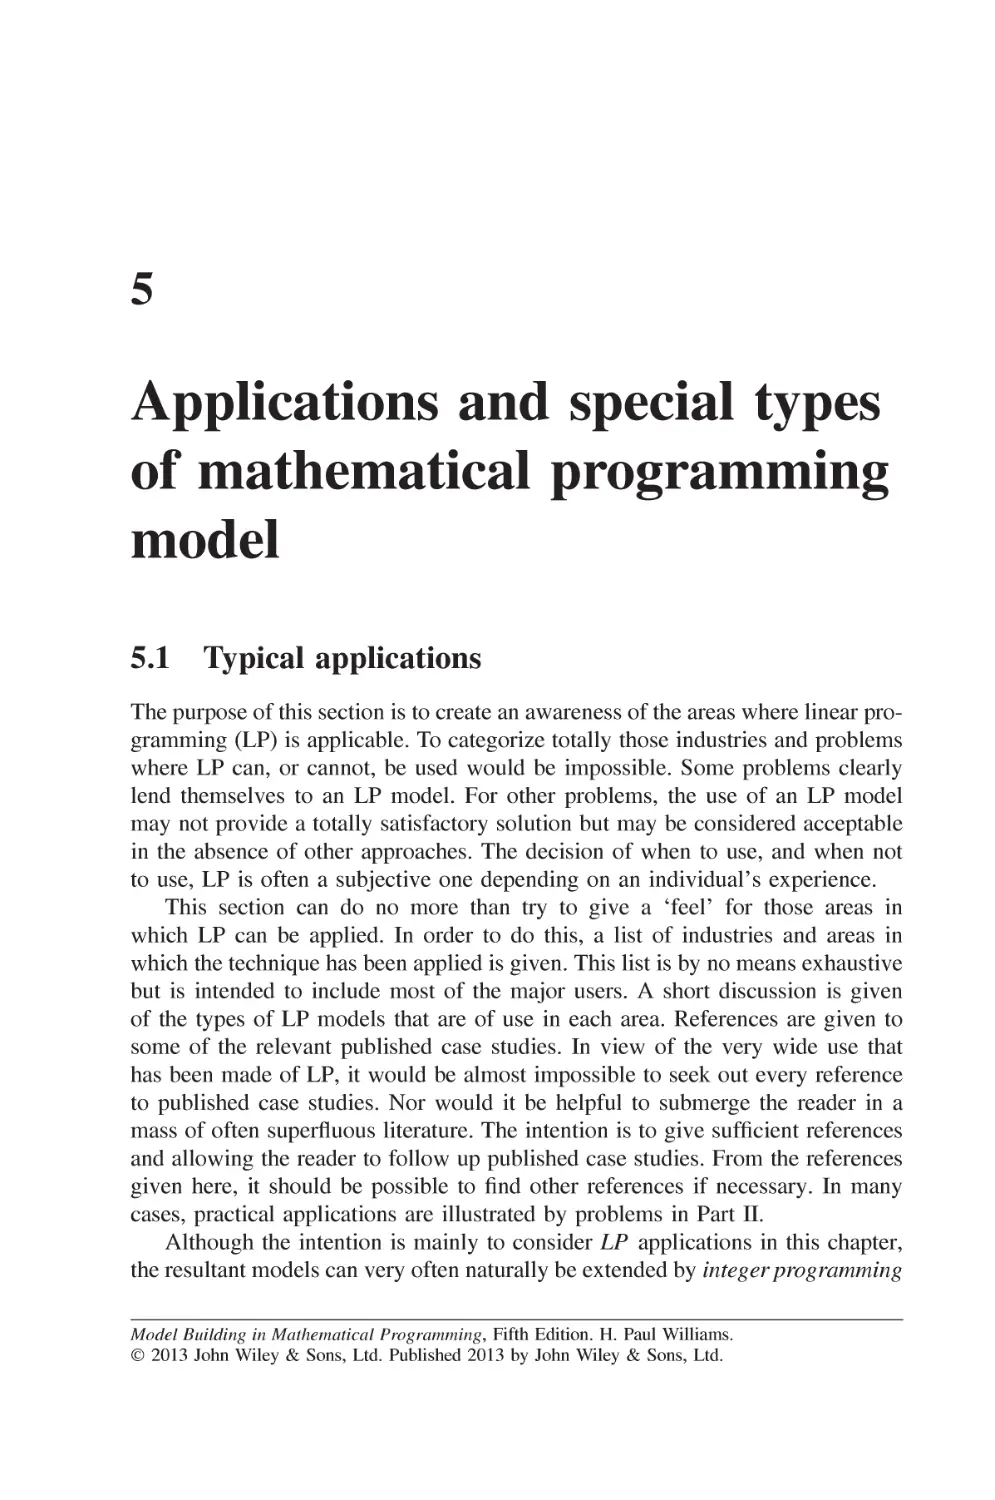 Chapter 5 Applications and special types of mathematical programming model